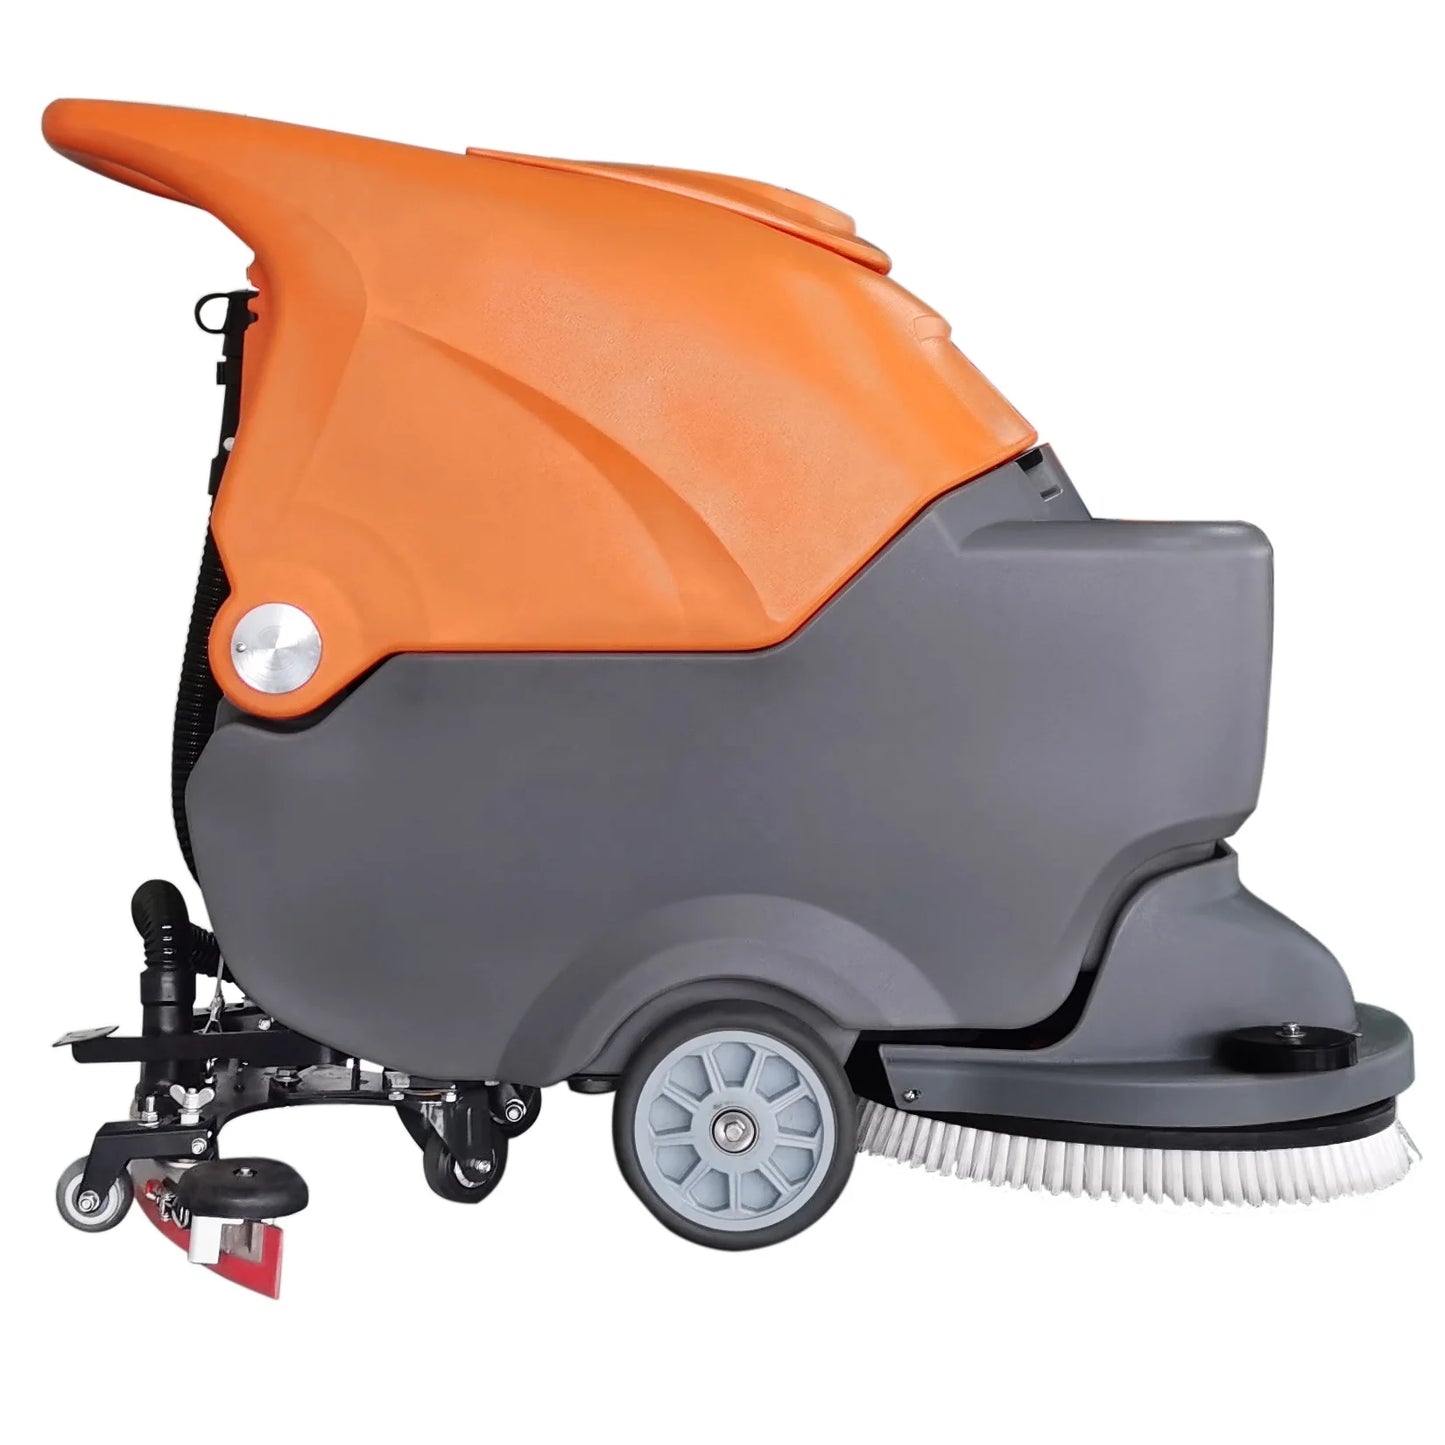 Floor cleaning machine sweeper scrubber equipment with nice scrubber brush